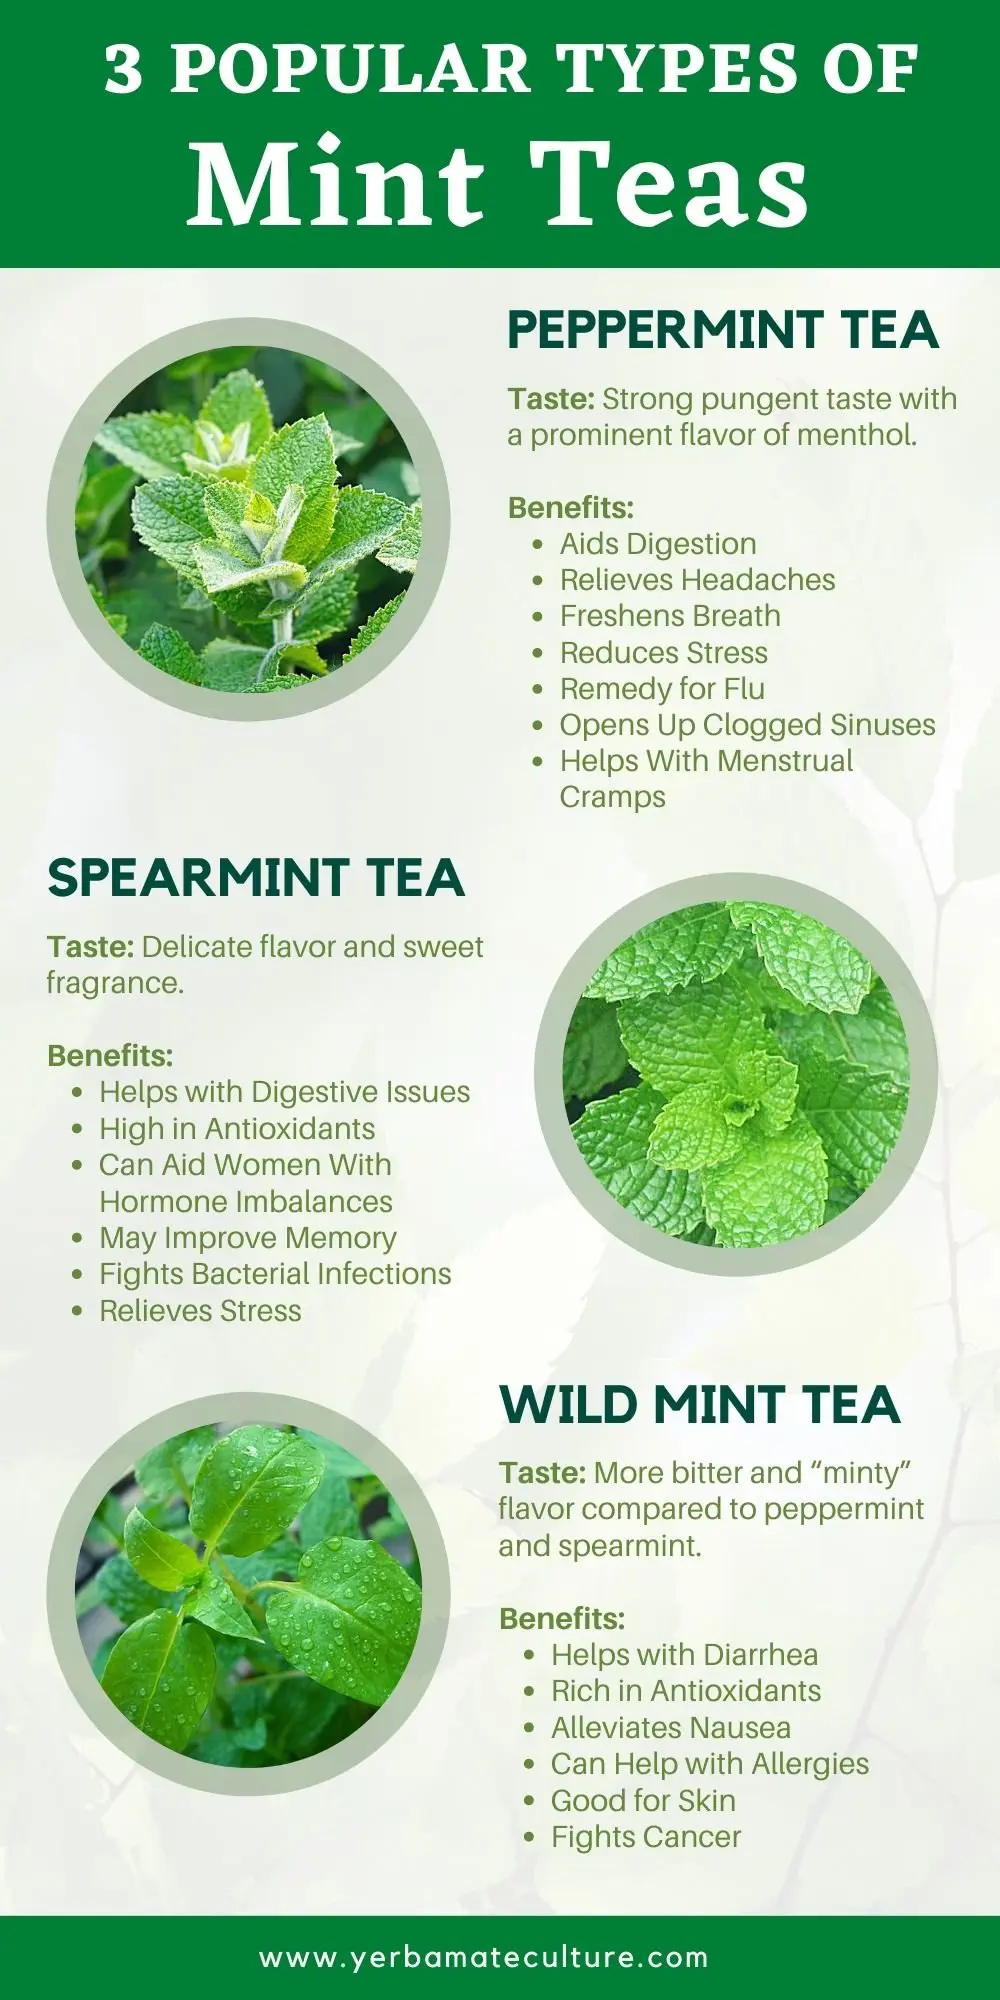 Does Peppermint Tea Have Caffeine? Read and Find Out!